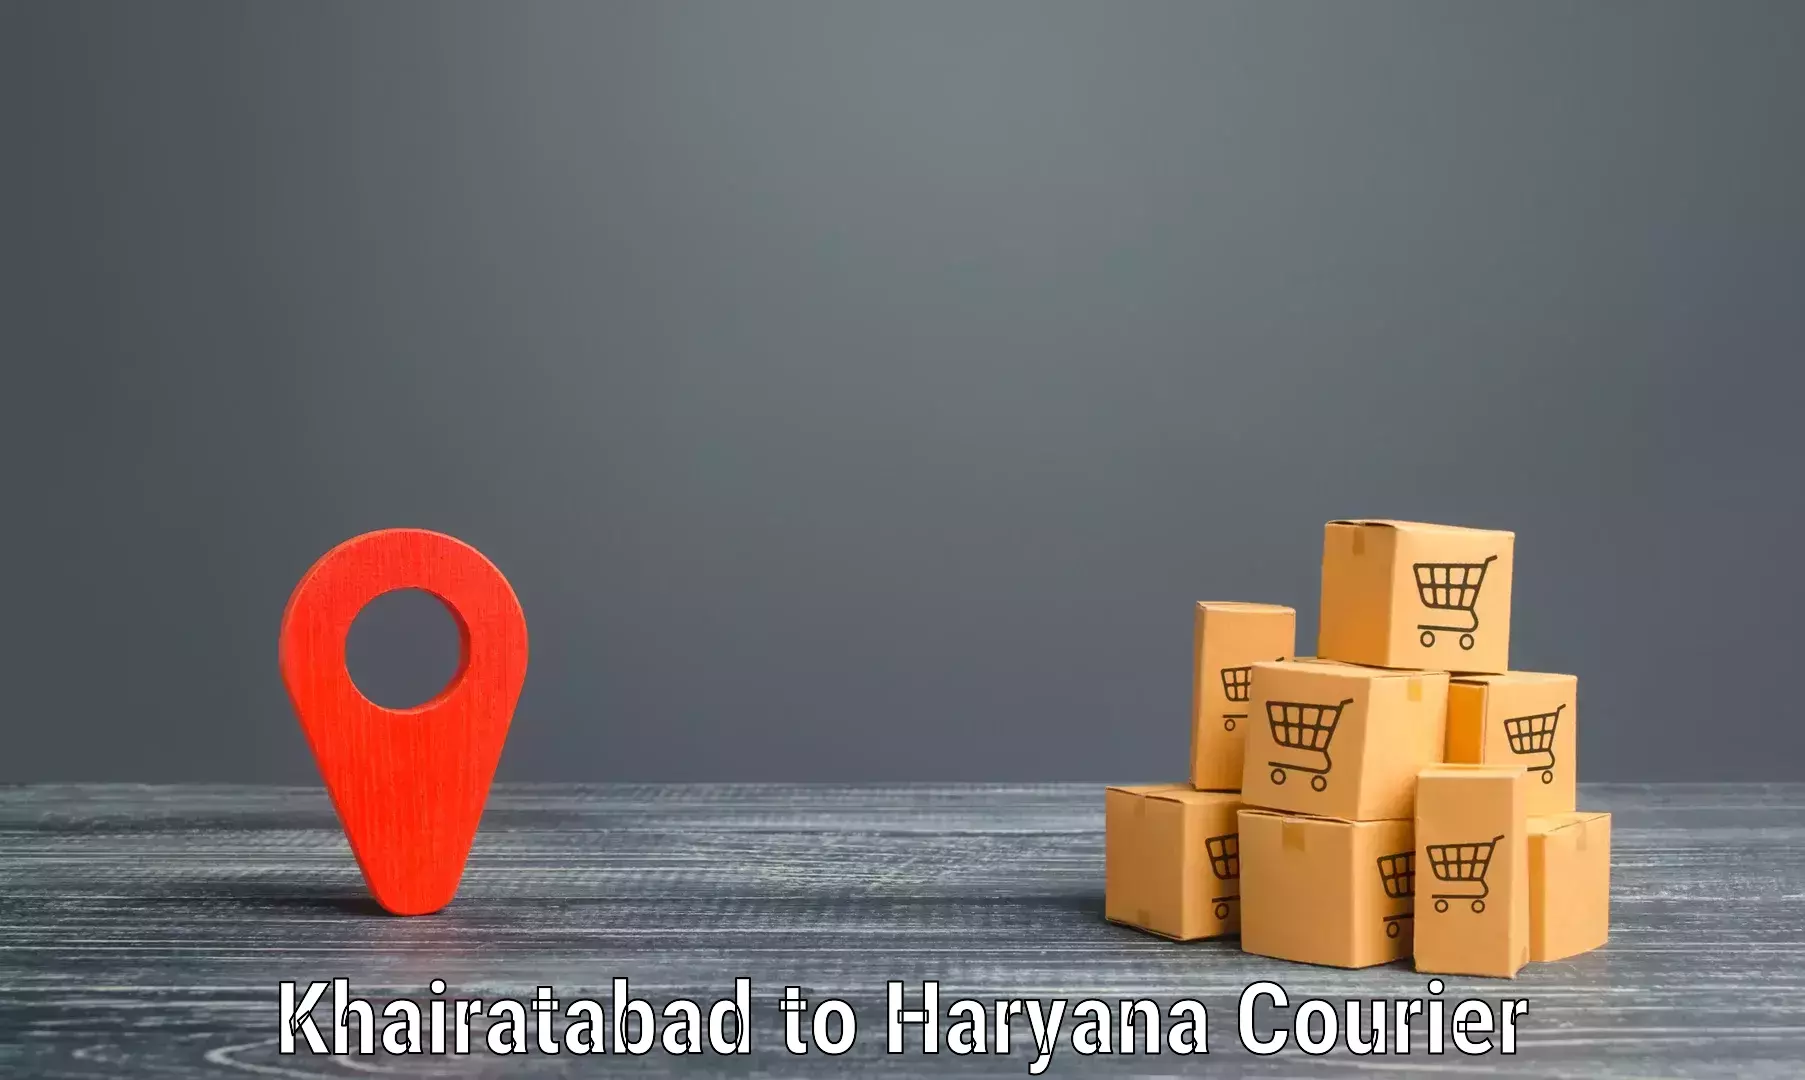 24/7 courier service Khairatabad to Nuh